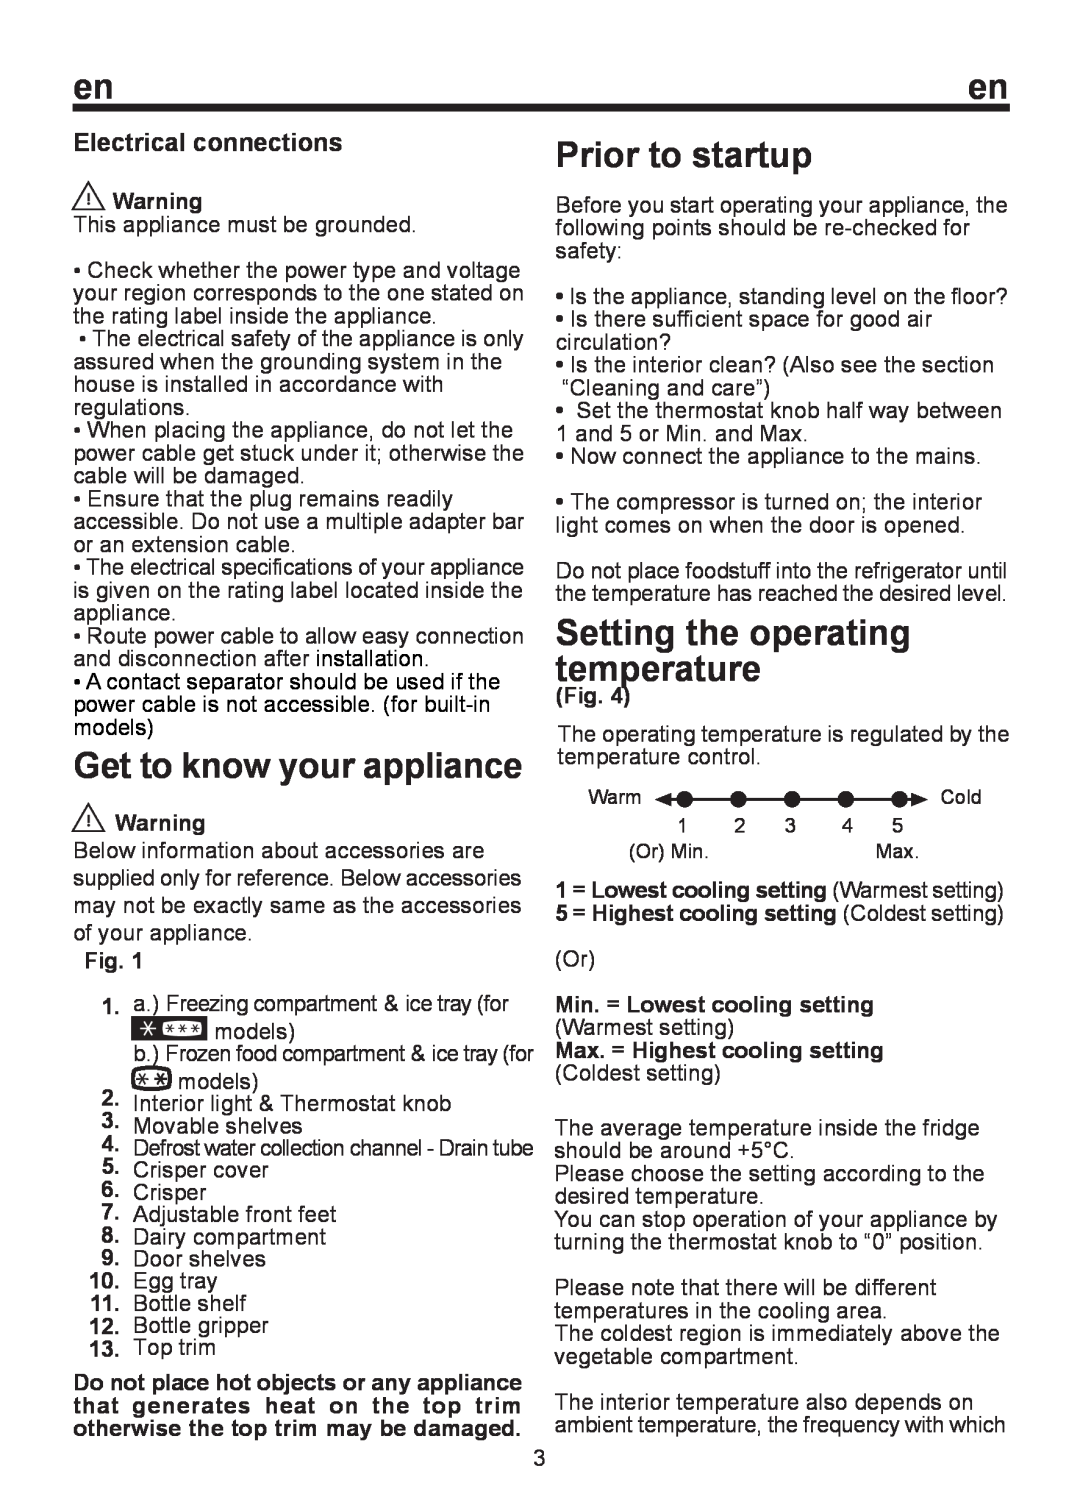 Smeg FA 120 AP Get to know your appliance, Prior to startup, Setting the operating temperature, Electrical connections 